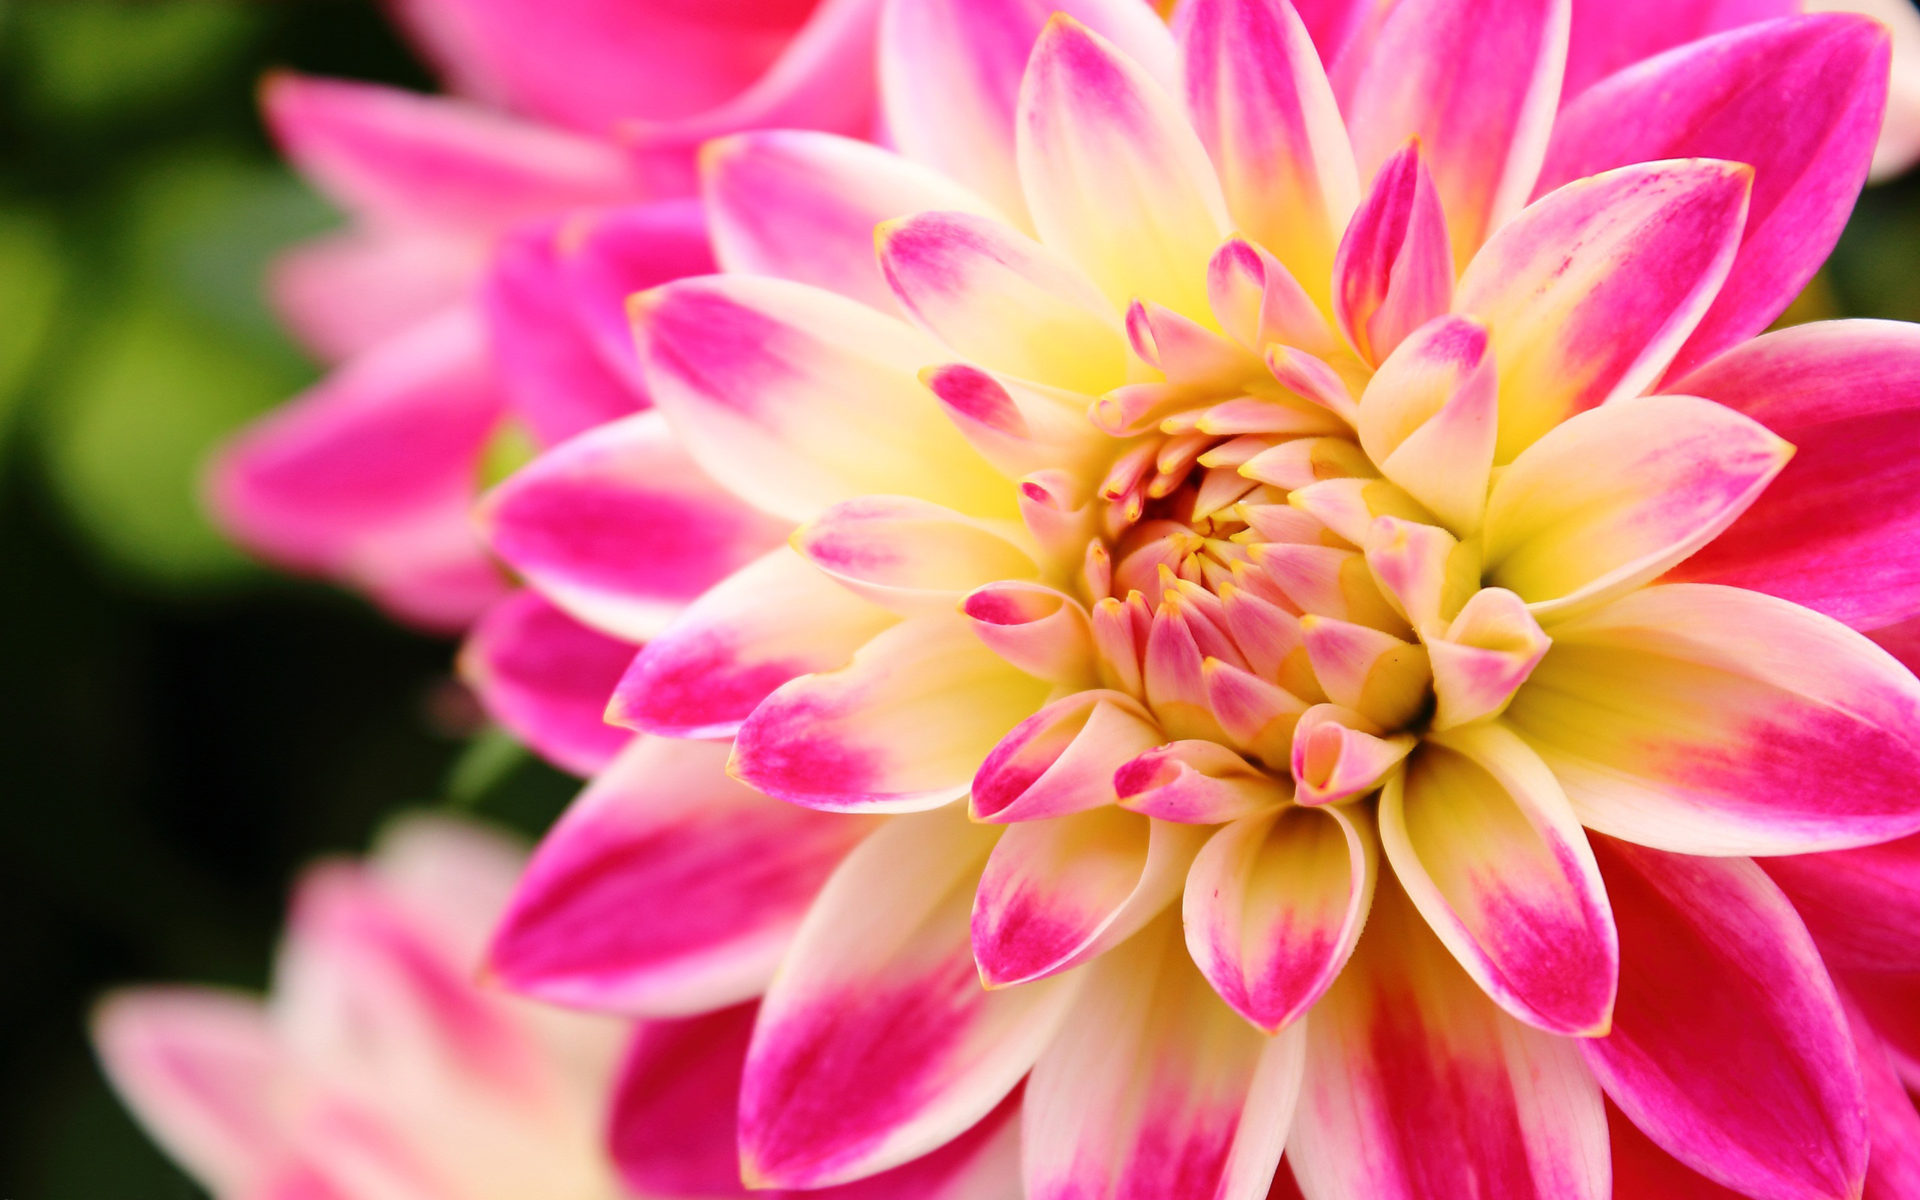 Flower In Three Colours Pink Dahlia White And Yellow HD Wallpaper For Mobile Phones And Pc 2560x1600, Wallpaper13.com